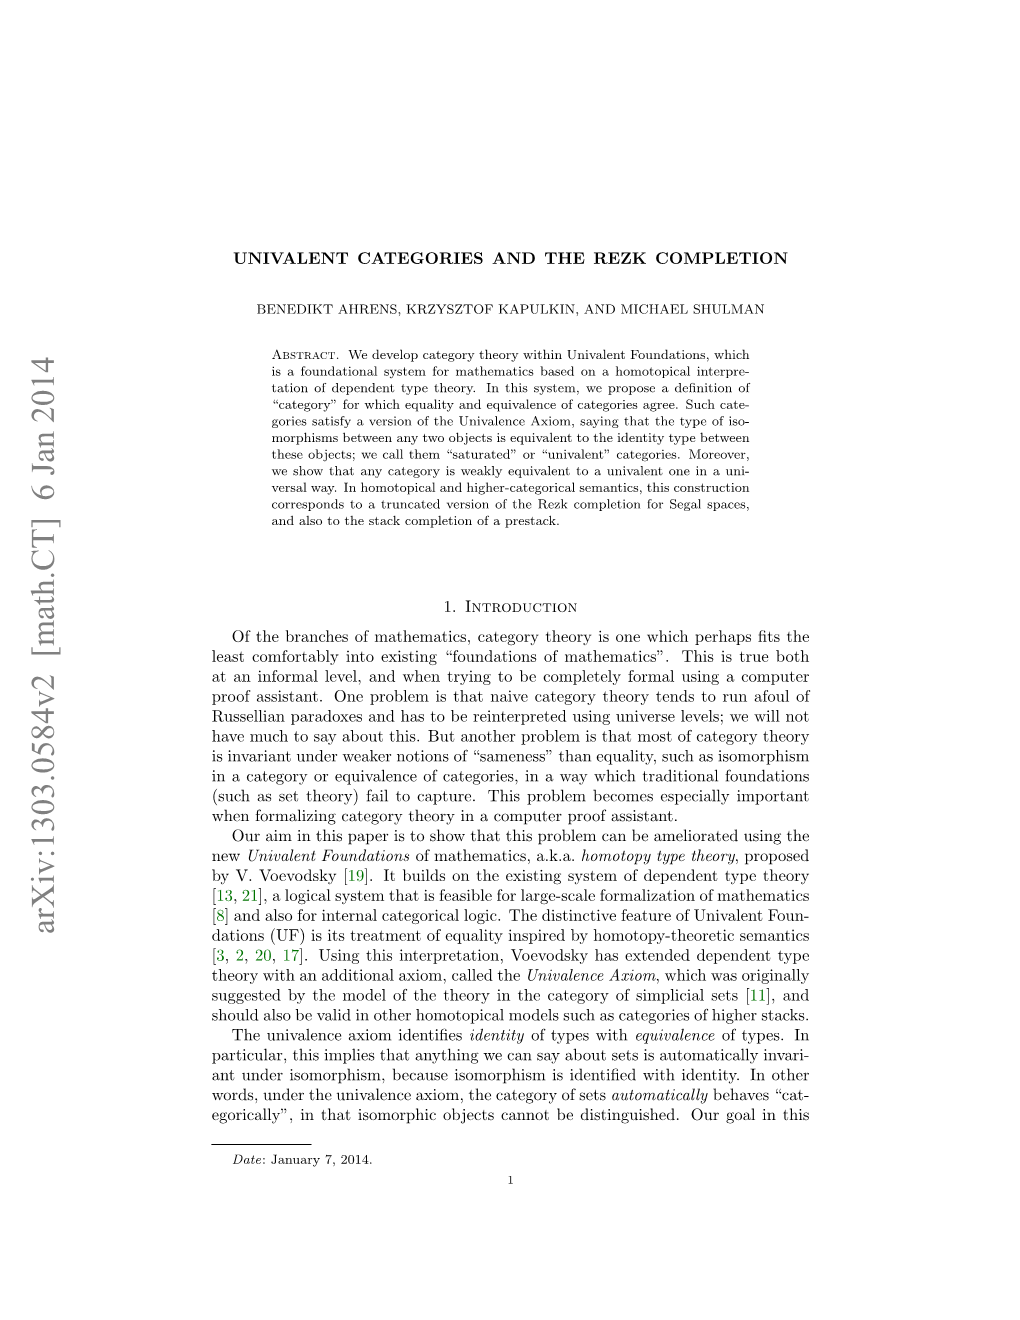 Univalent Categories and the Rezk Completion